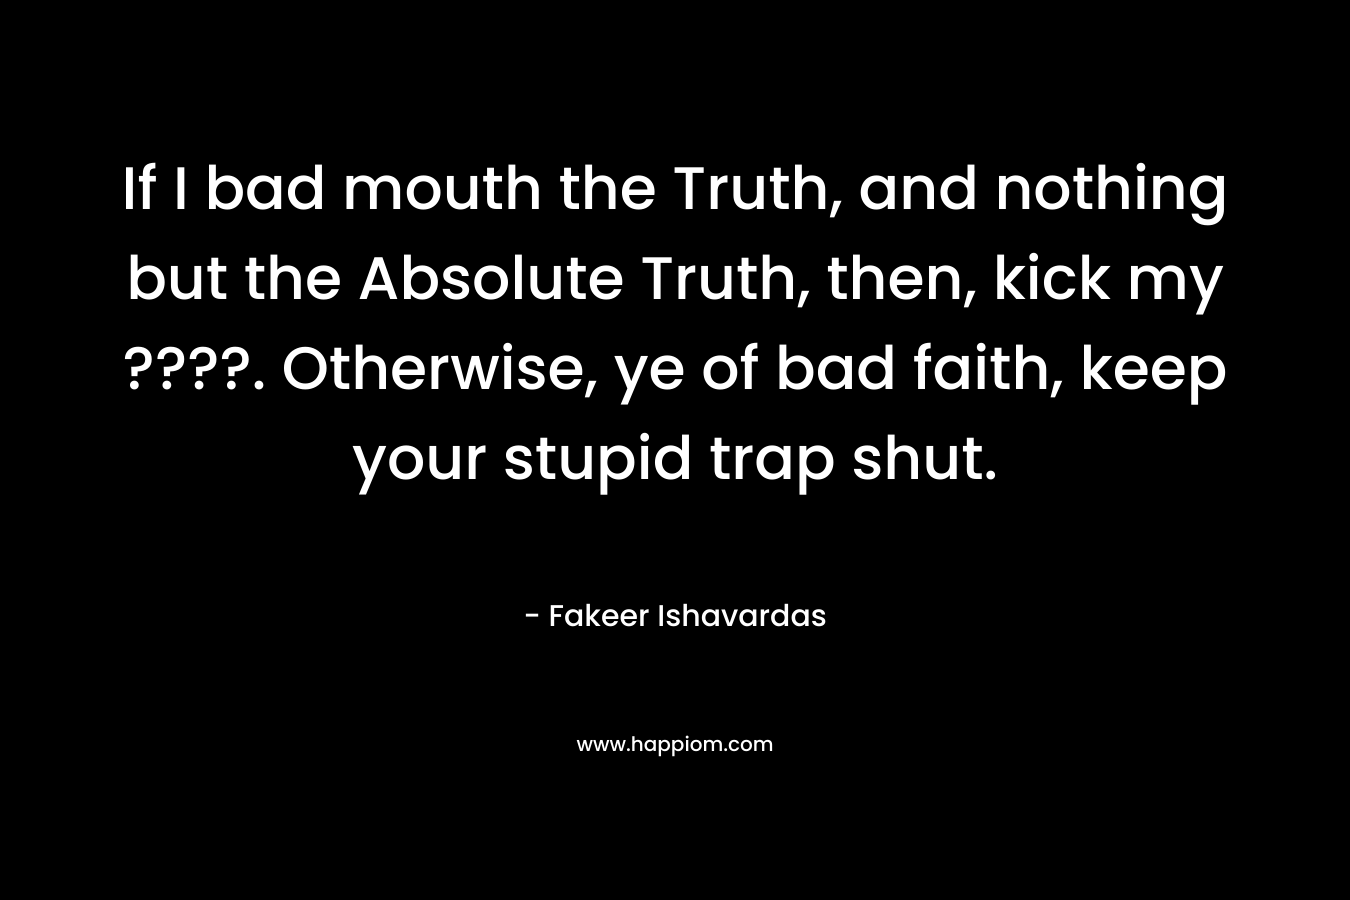 If I bad mouth the Truth, and nothing but the Absolute Truth, then, kick my ????. Otherwise, ye of bad faith, keep your stupid trap shut.